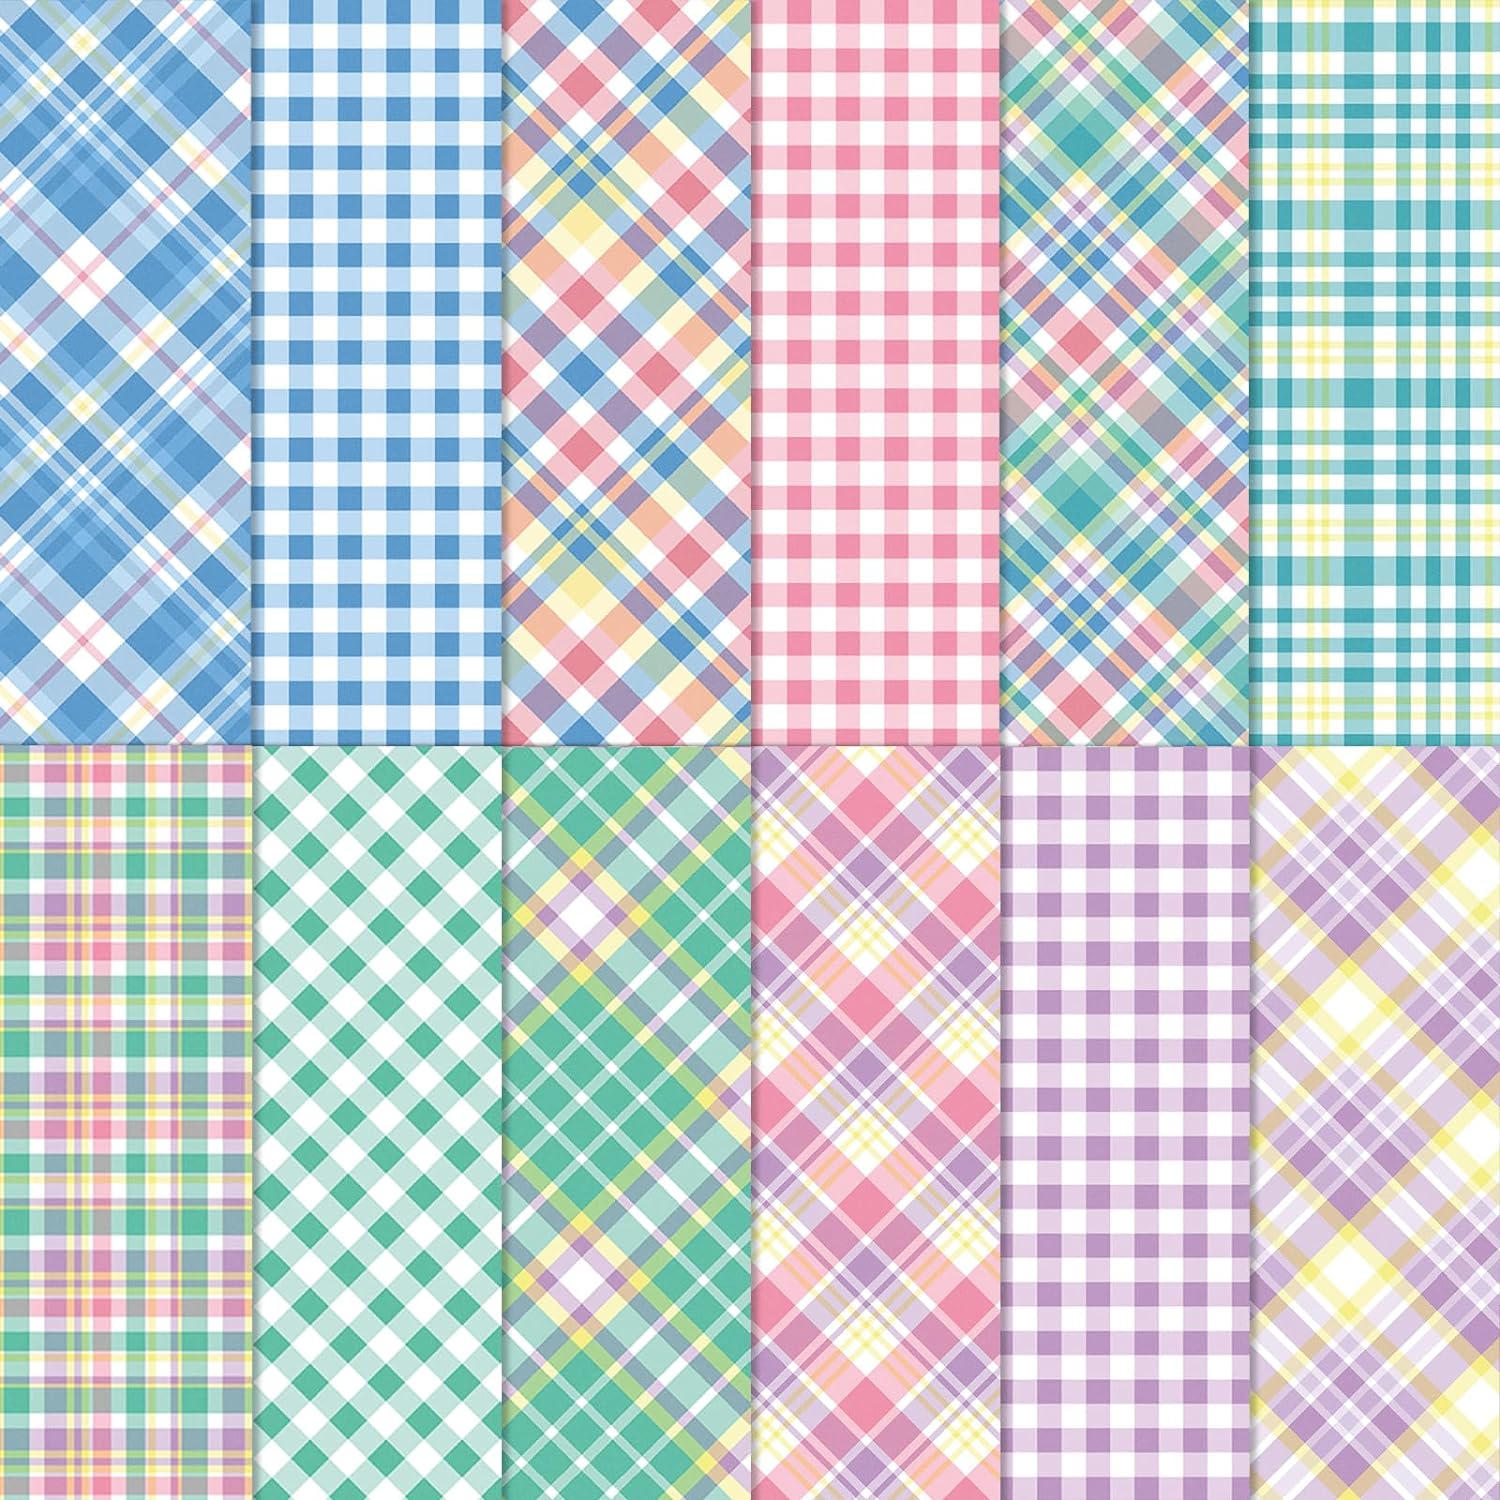 Whaline 12Pcs Spring Plaid Cotton Fabric Bundles 18 x 22 Inch Tartan Printed Fat Quarters Purple Green Pink Blue Quilting Patchwork Squares Sewing Fabrics for DIY Handmade Crafting Home Party Decor